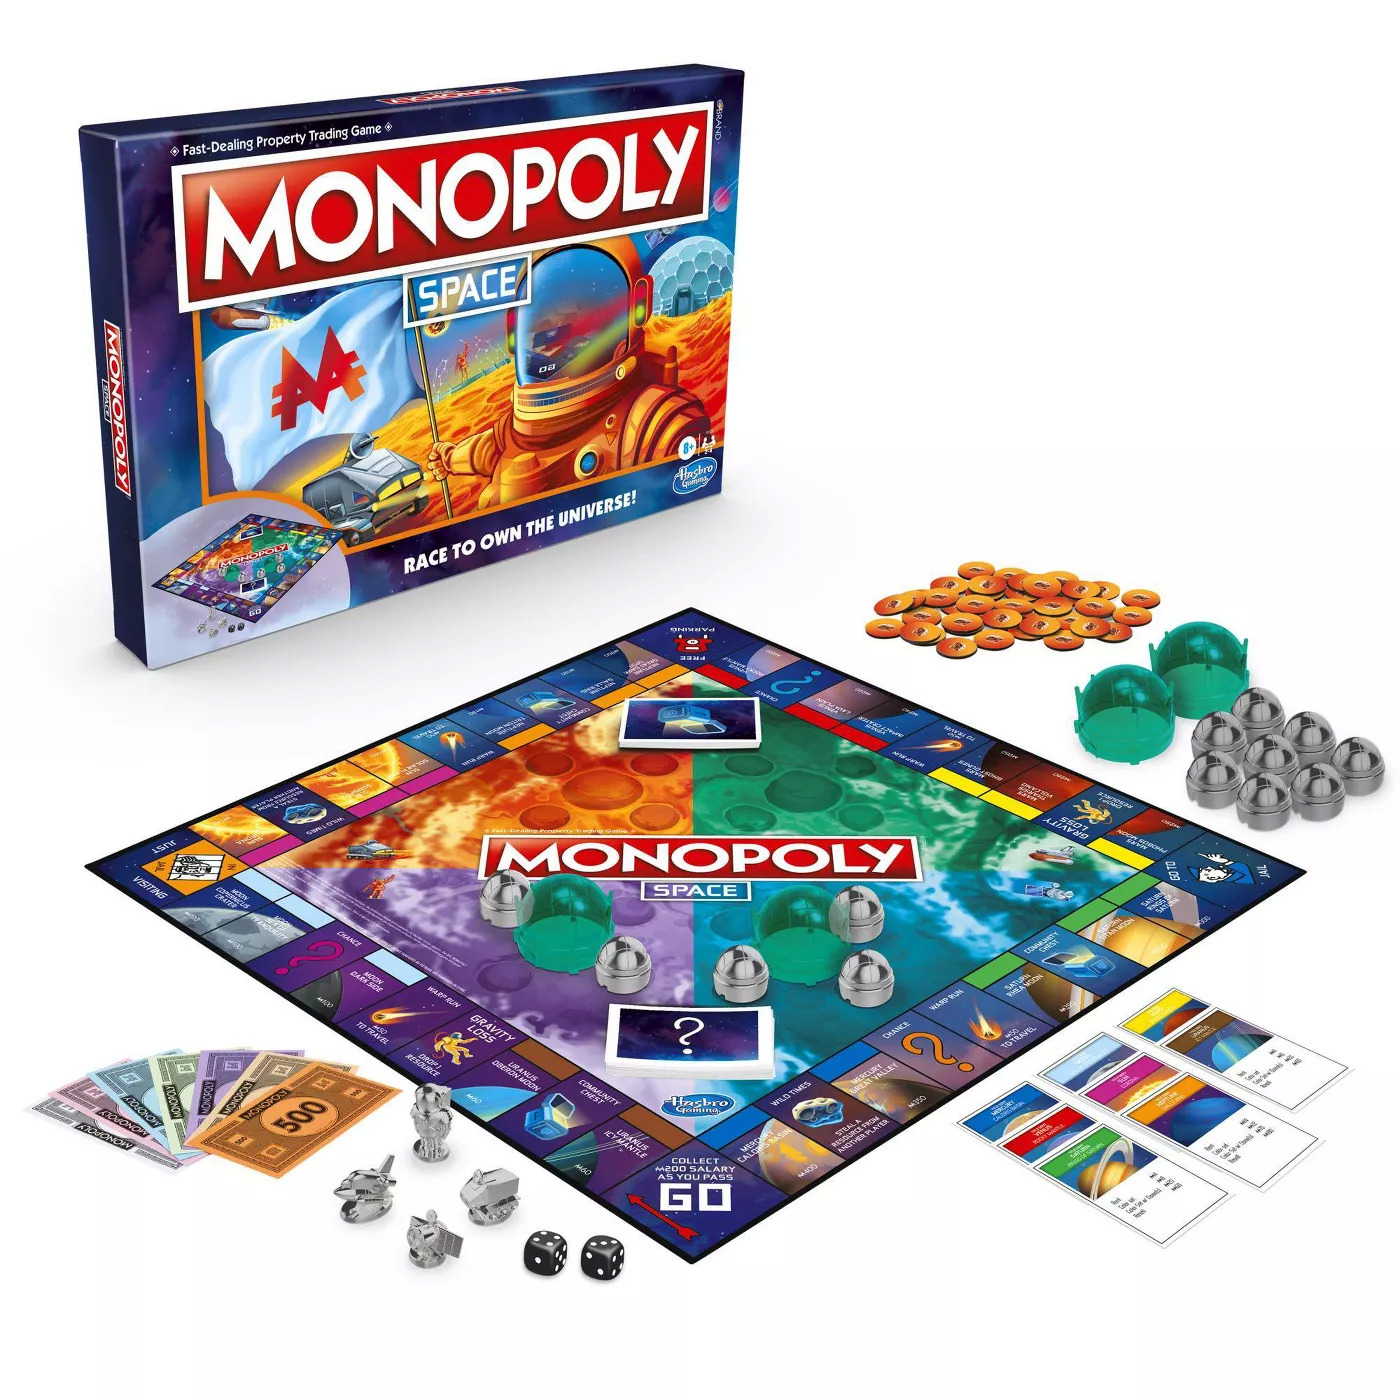 Monopoly Board Games: Space (Target Exclusive) $10.49, Space Jam Edition $10.99